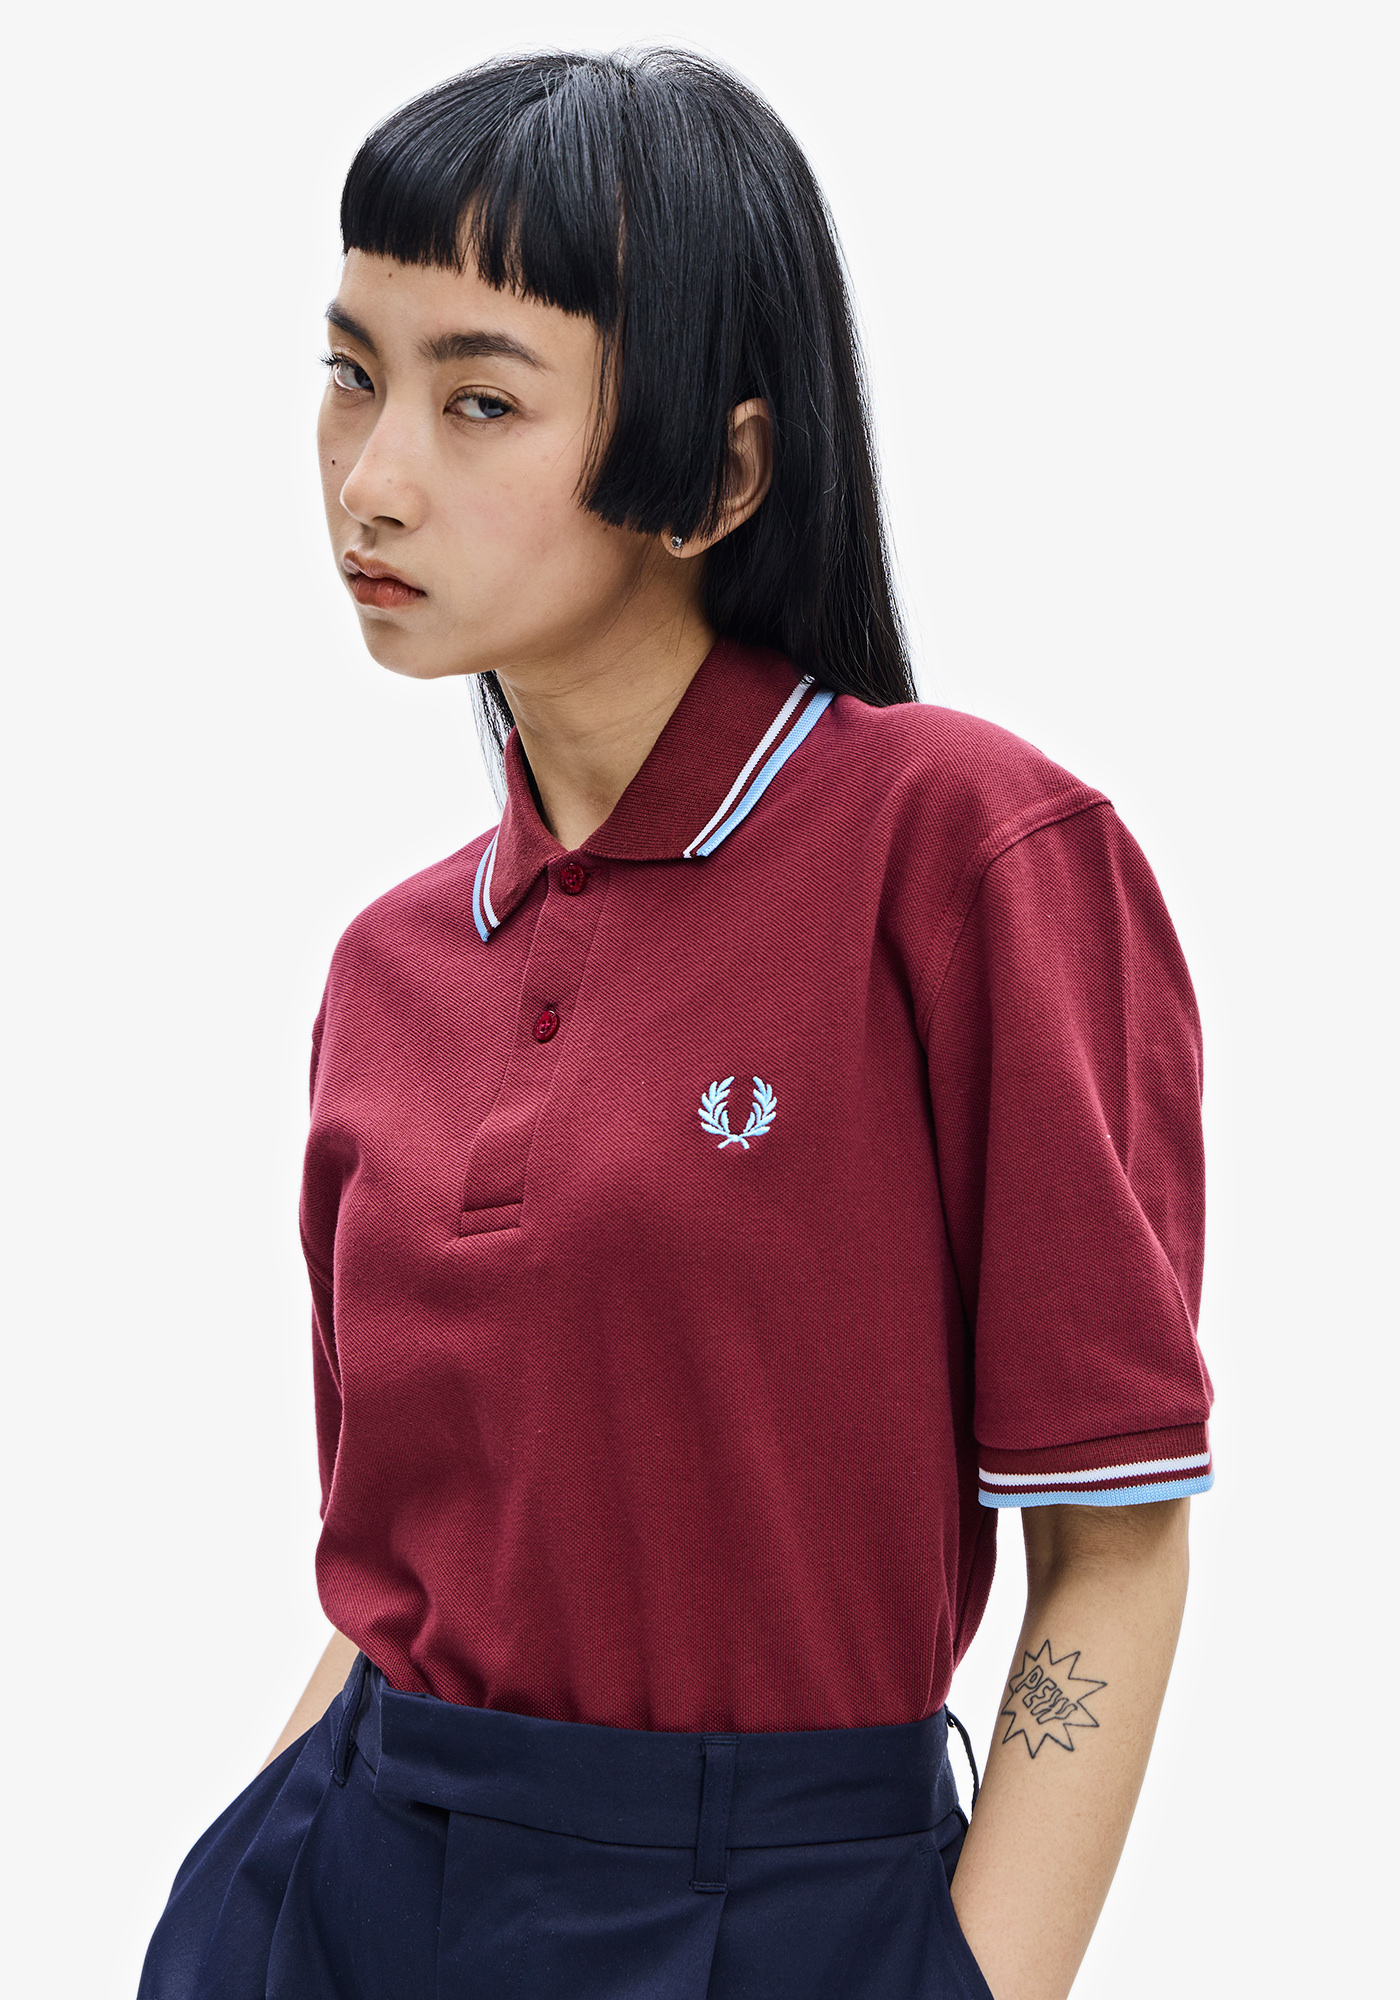 The Fred Perry Shirt - M12(36 157: BLACK / CHAMP / CHAMP)｜ FRED 